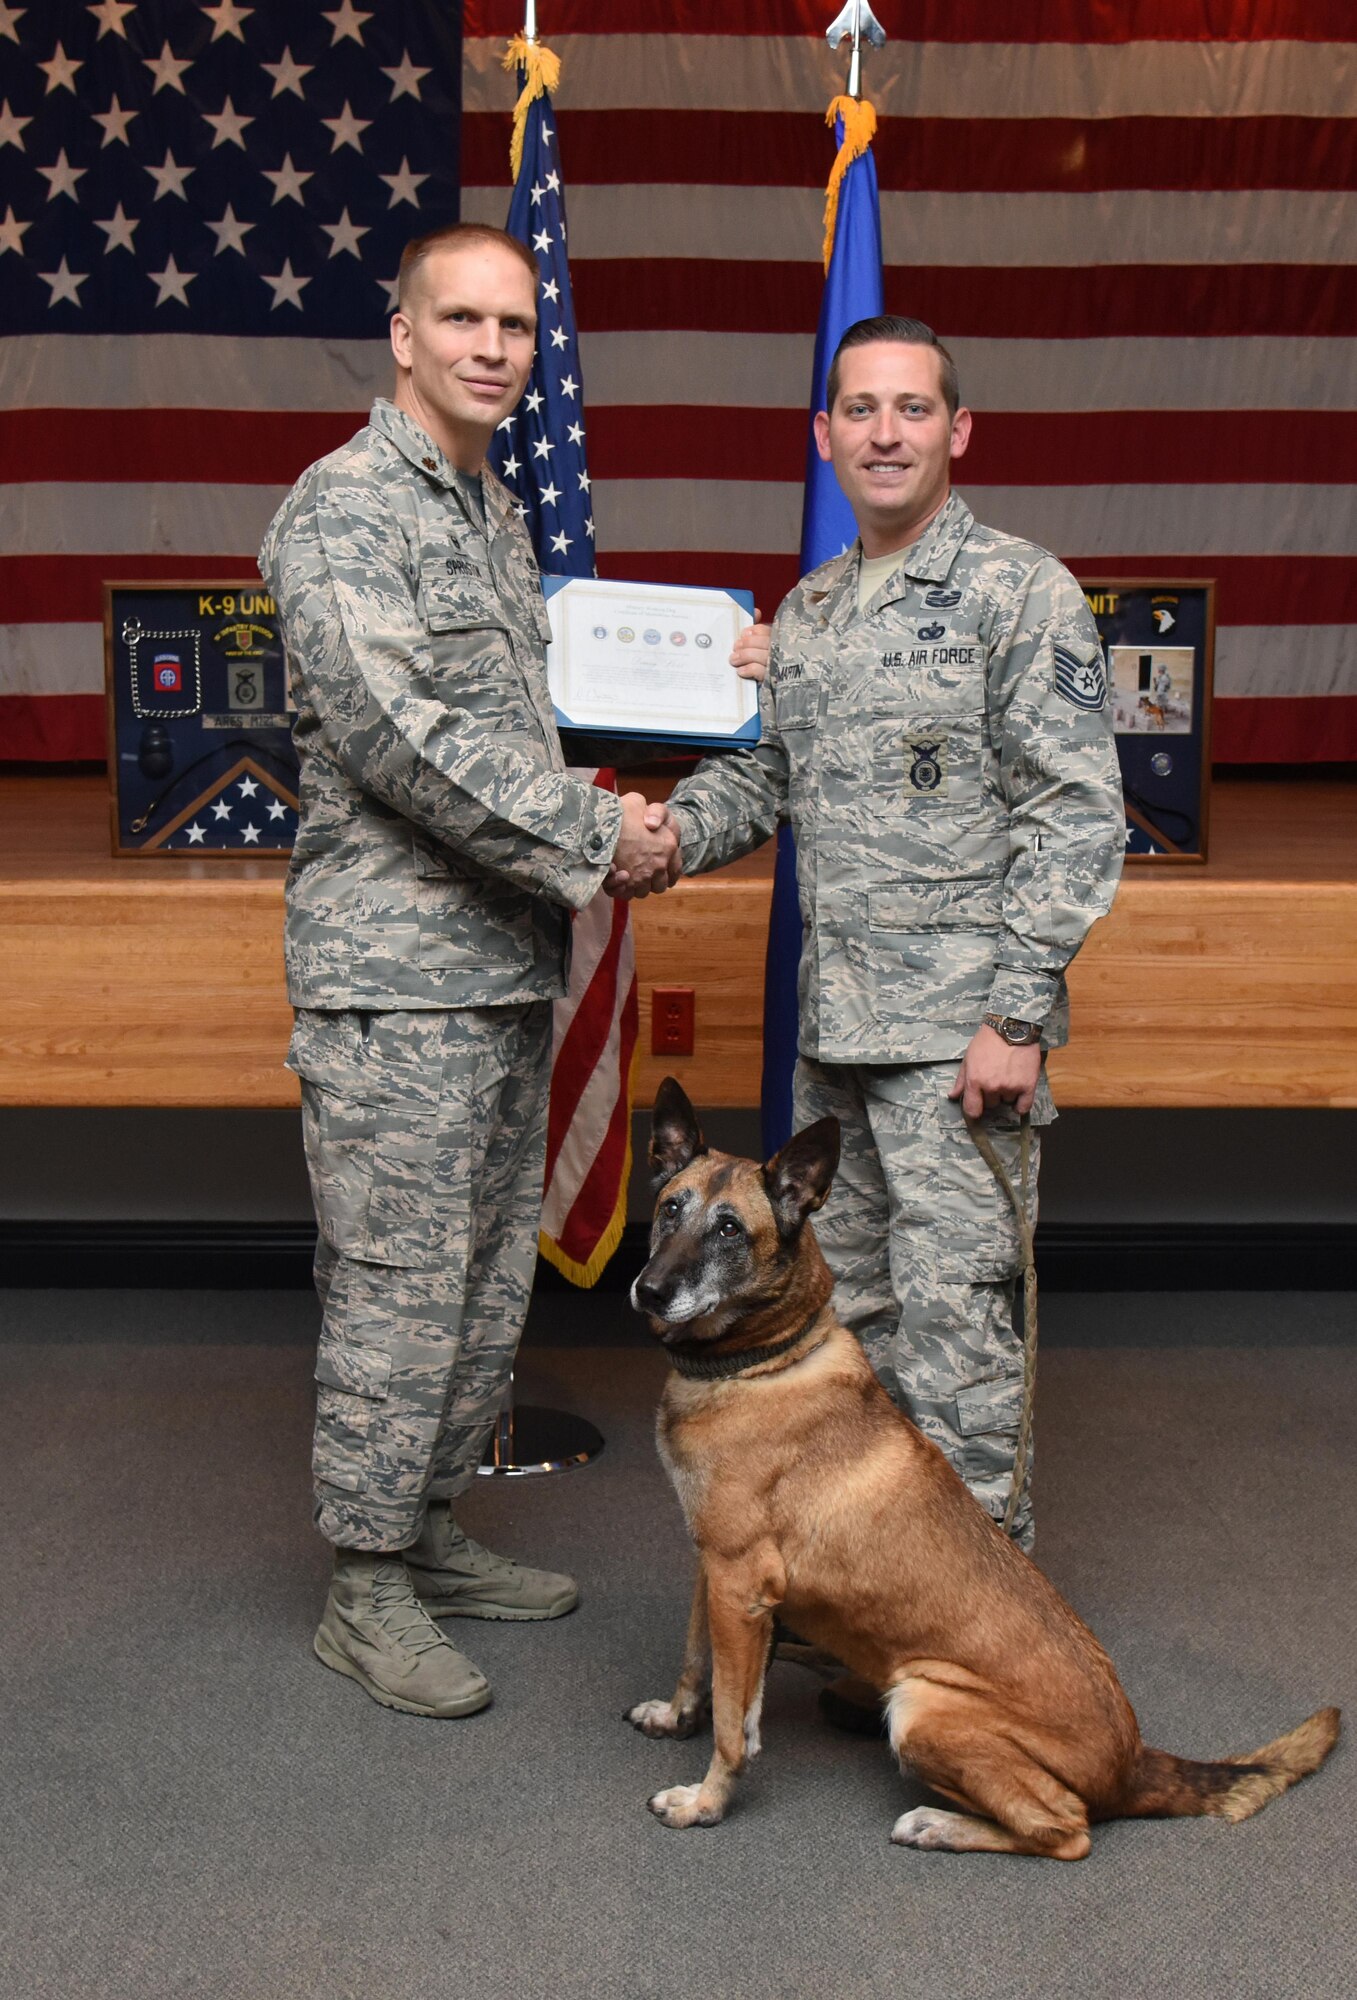 Maj. Devin Sproston, 81st Security Forces Squadron commander, presents a retirement certificate to Tech. Sgt. James Martin III, 81st SFS charlie flight flight chief, on behalf of Densy, 81st SFS military working dog, during Densy’s retirement ceremony at the Keesler Medical Center Don Wylie Auditorium Dec. 2, 2016, on Keesler Air Force Base, Miss. Densy served more than nine years in the Air Force. After serving together for two years, to include one deployment, Martin adopted Densy. (U.S. Air Force photo by Kemberly Groue)